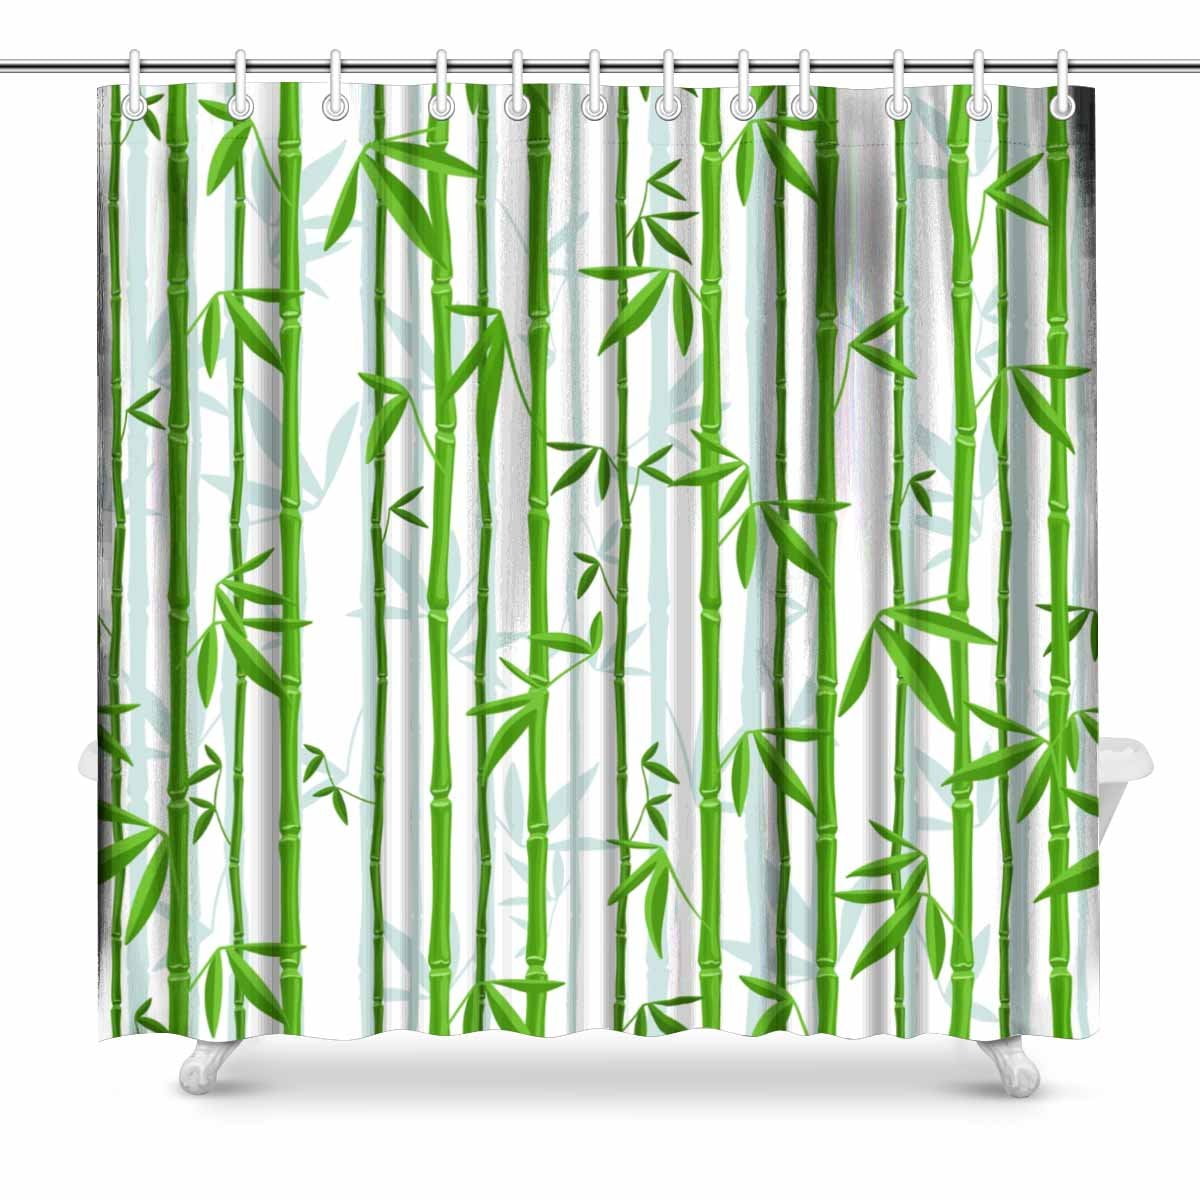 Details about   Bamboo Design PVC Shower Curtain with Hooks Green 54"x84" 